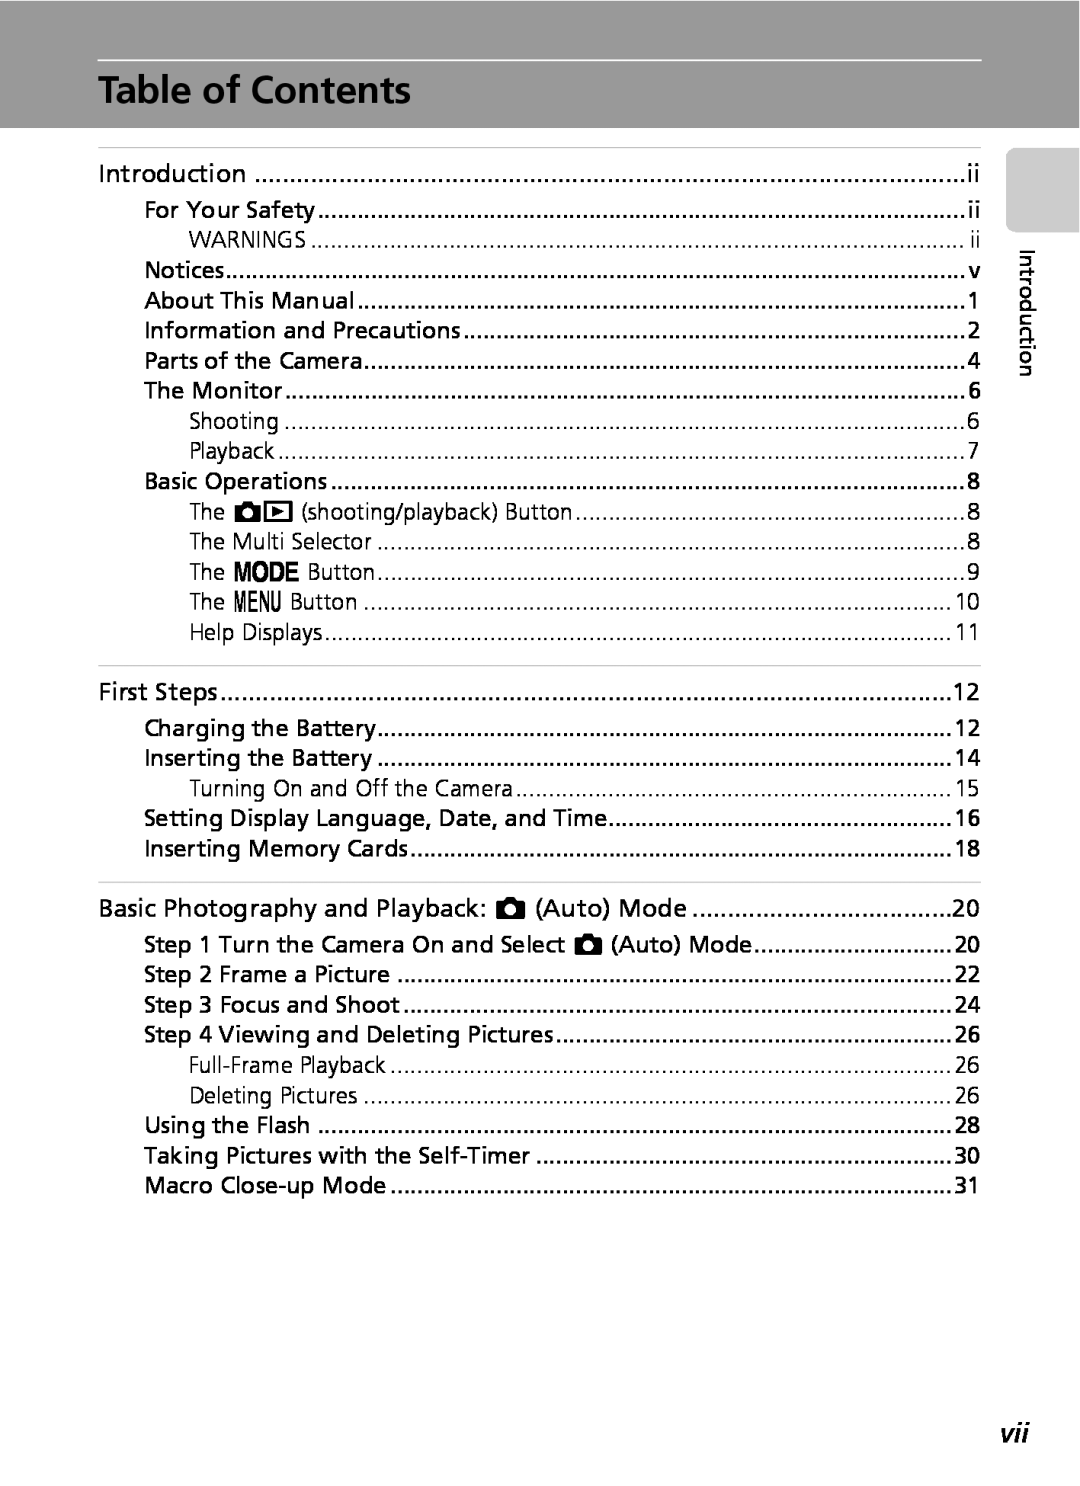 Nikon COOLPIXS9 manual Table of Contents, Basic Photography and Playback: L Auto Mode 